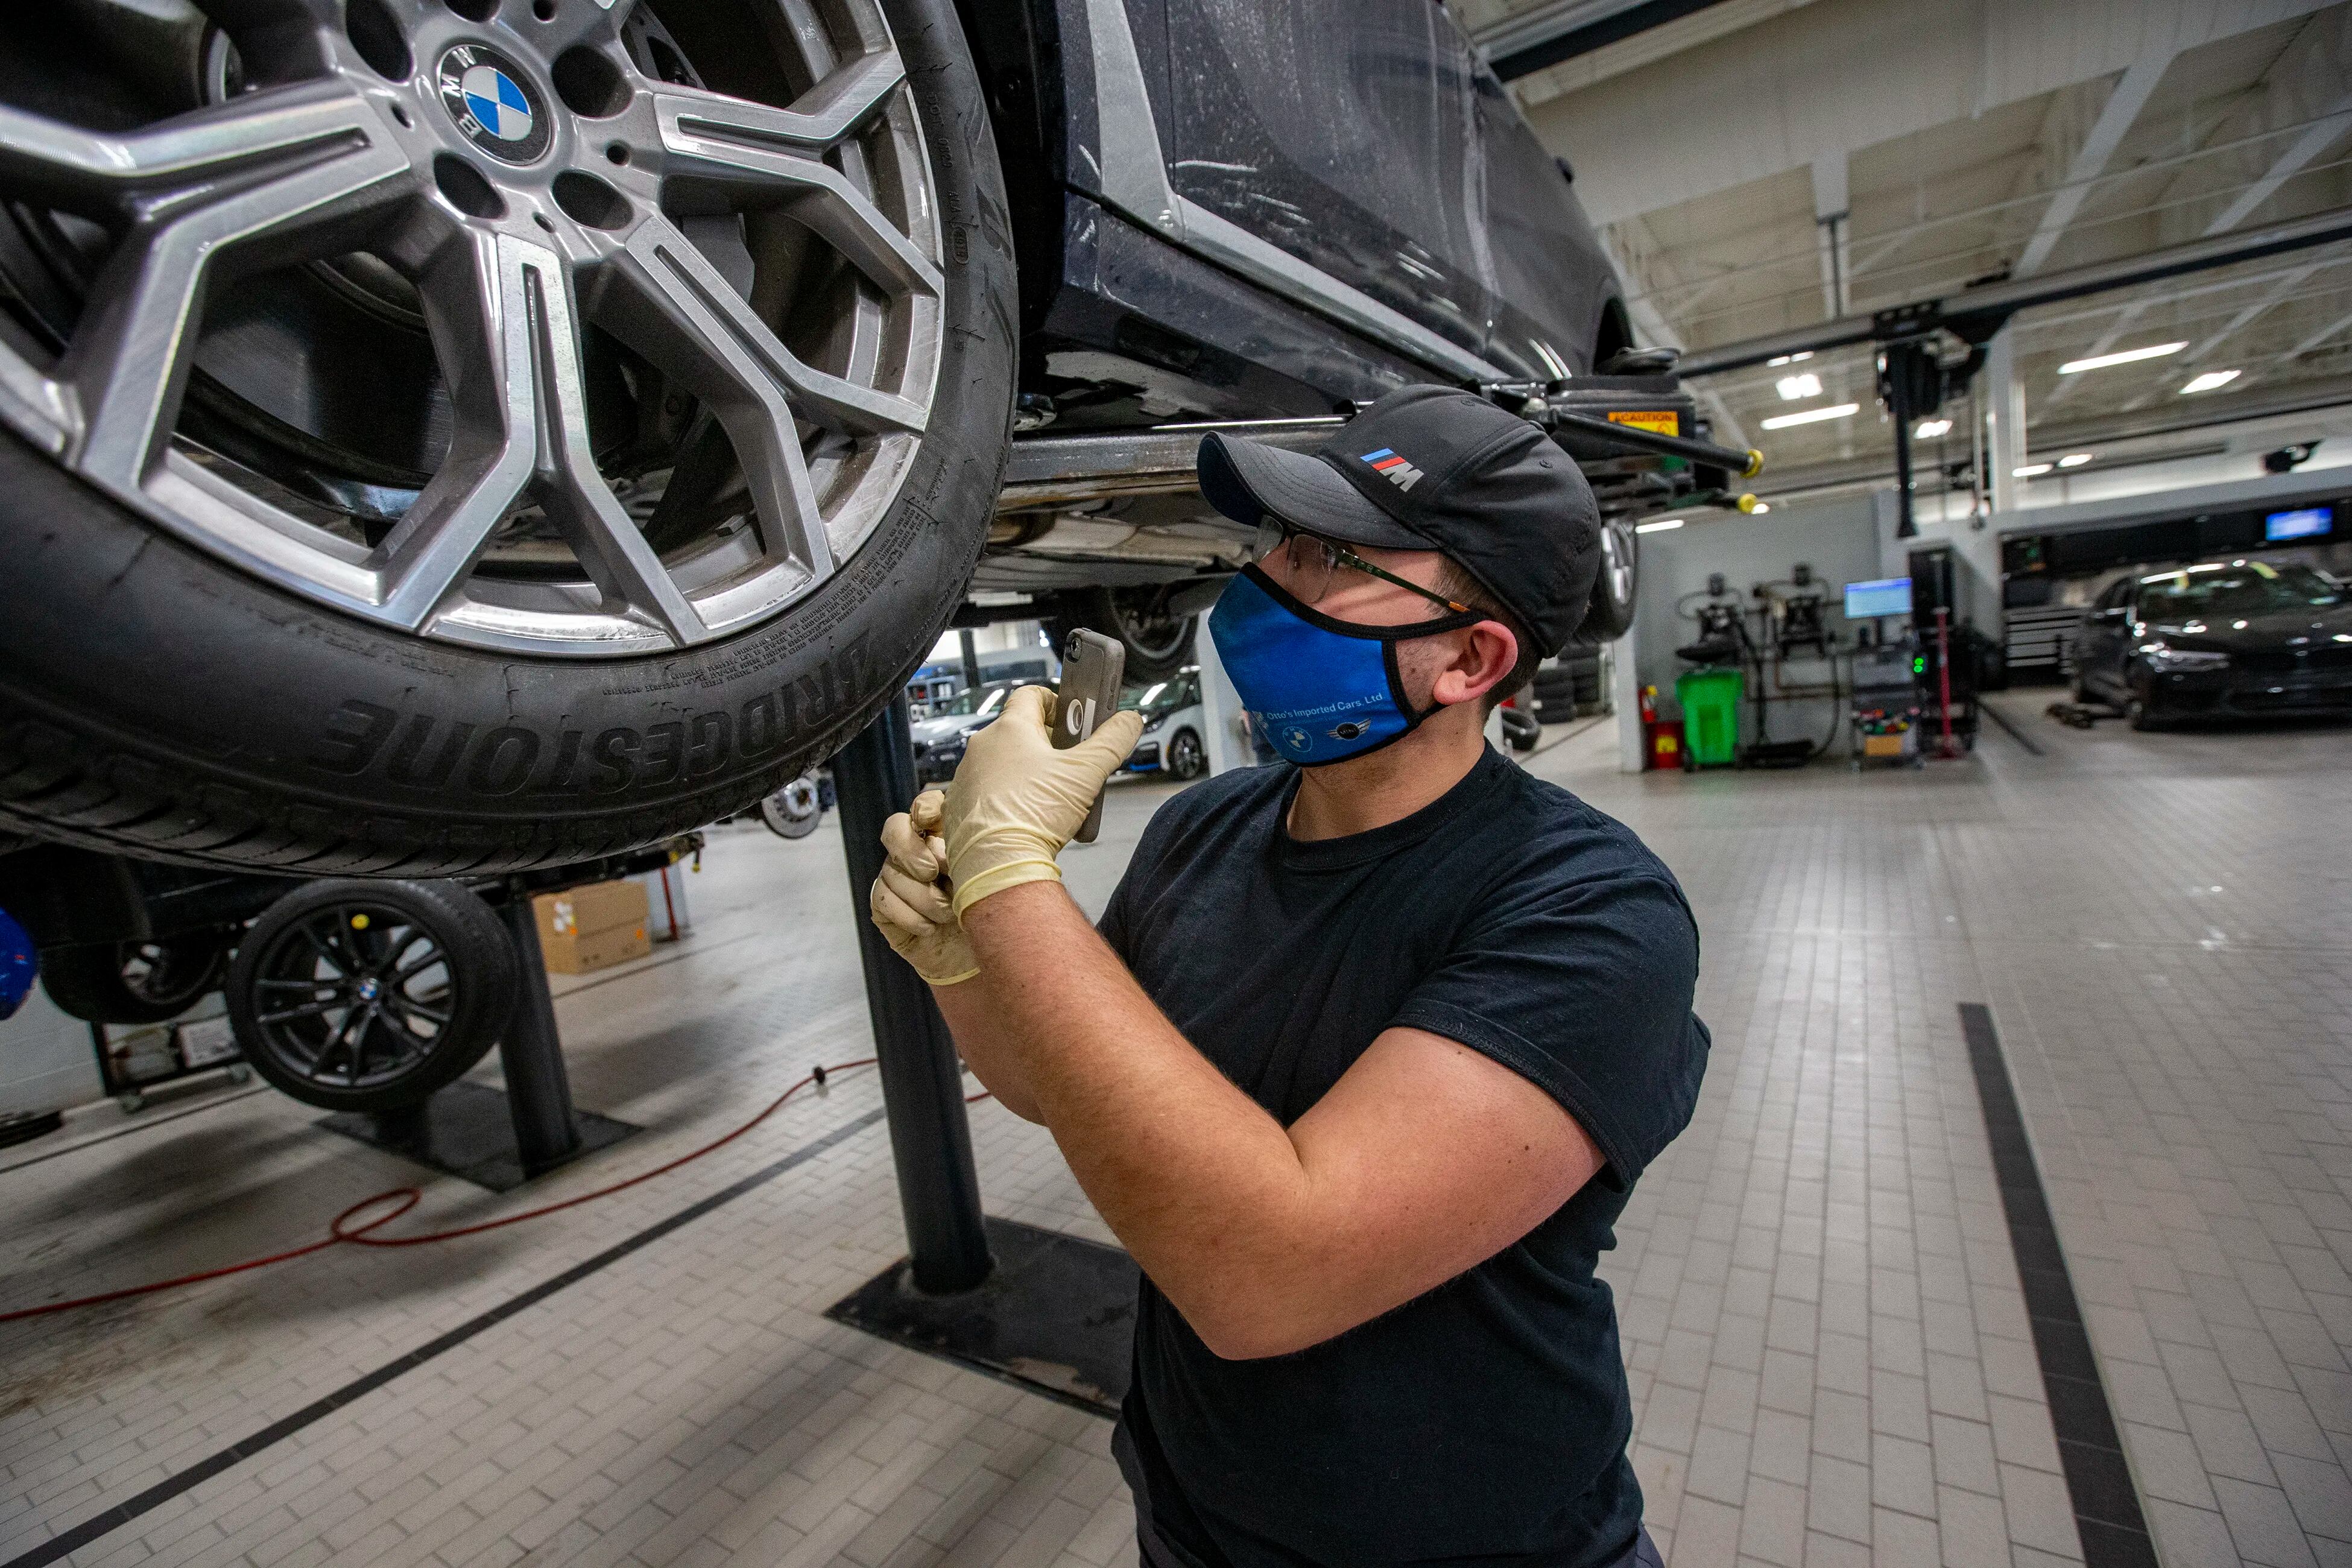 As auto repair goes high tech, top technicians can earn over $20K